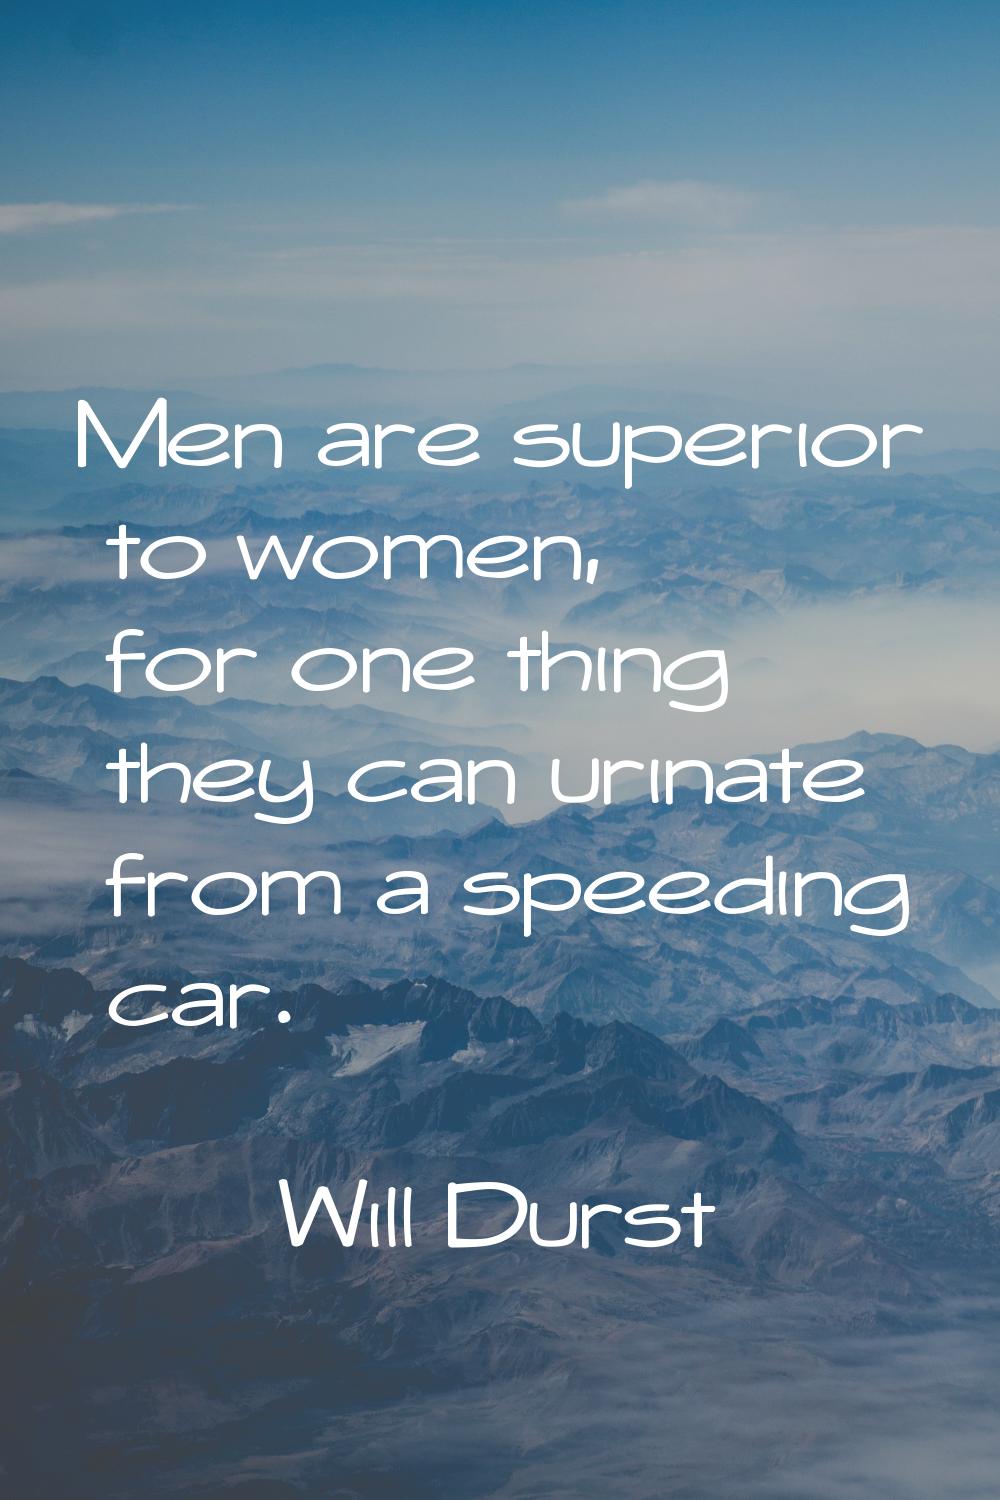 Men are superior to women, for one thing they can urinate from a speeding car.